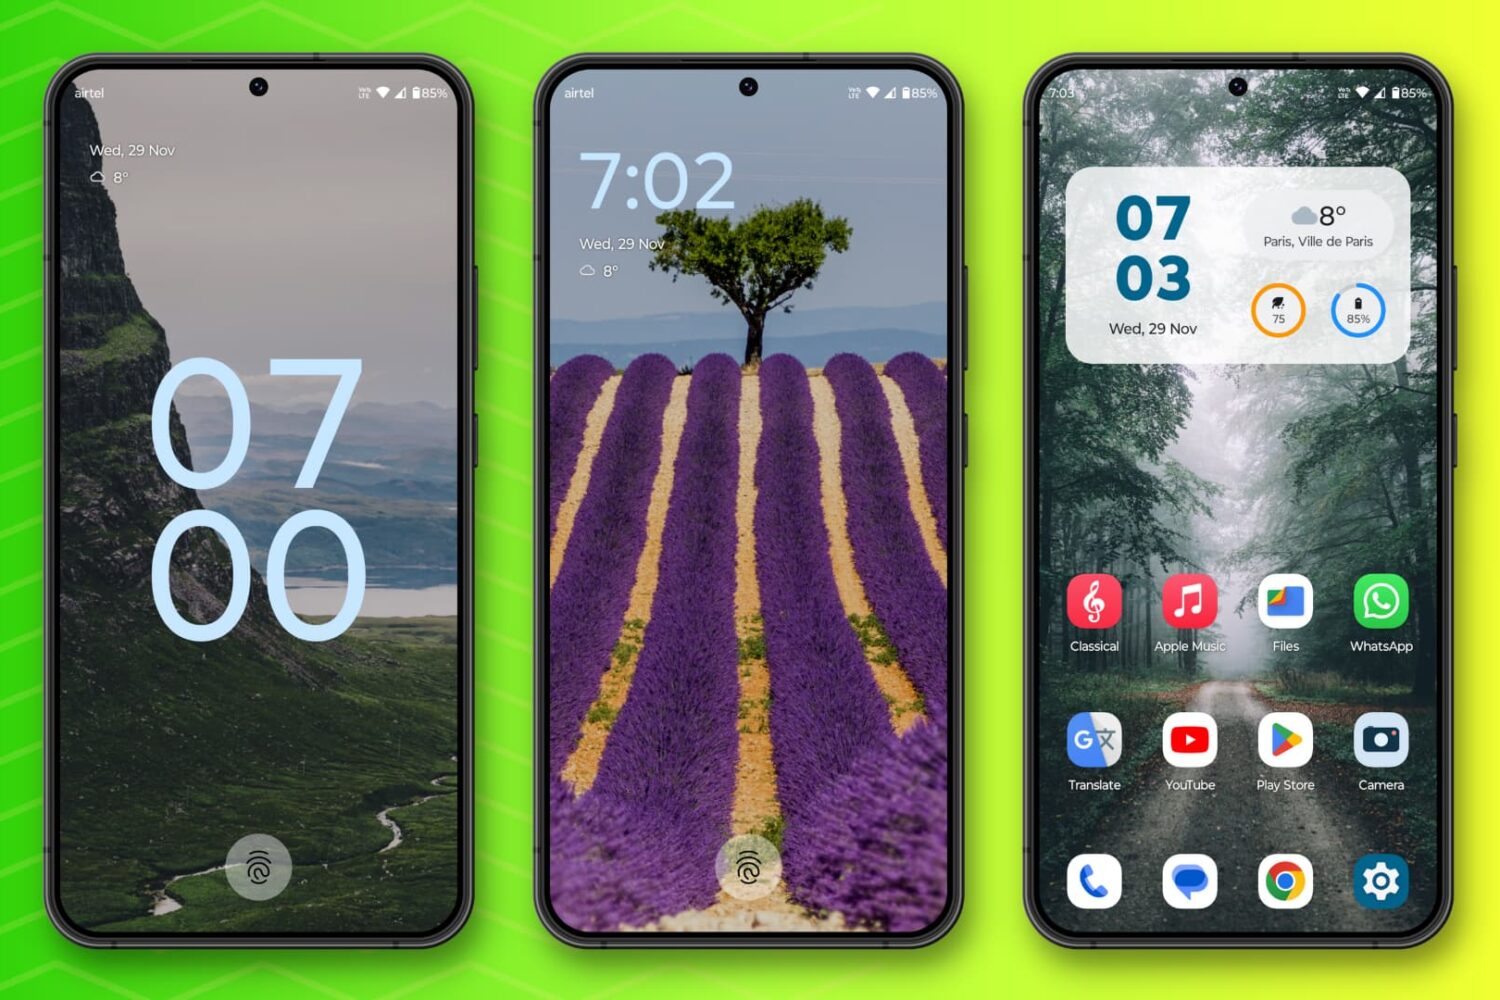 Android phone Lock Screen and Home Screens